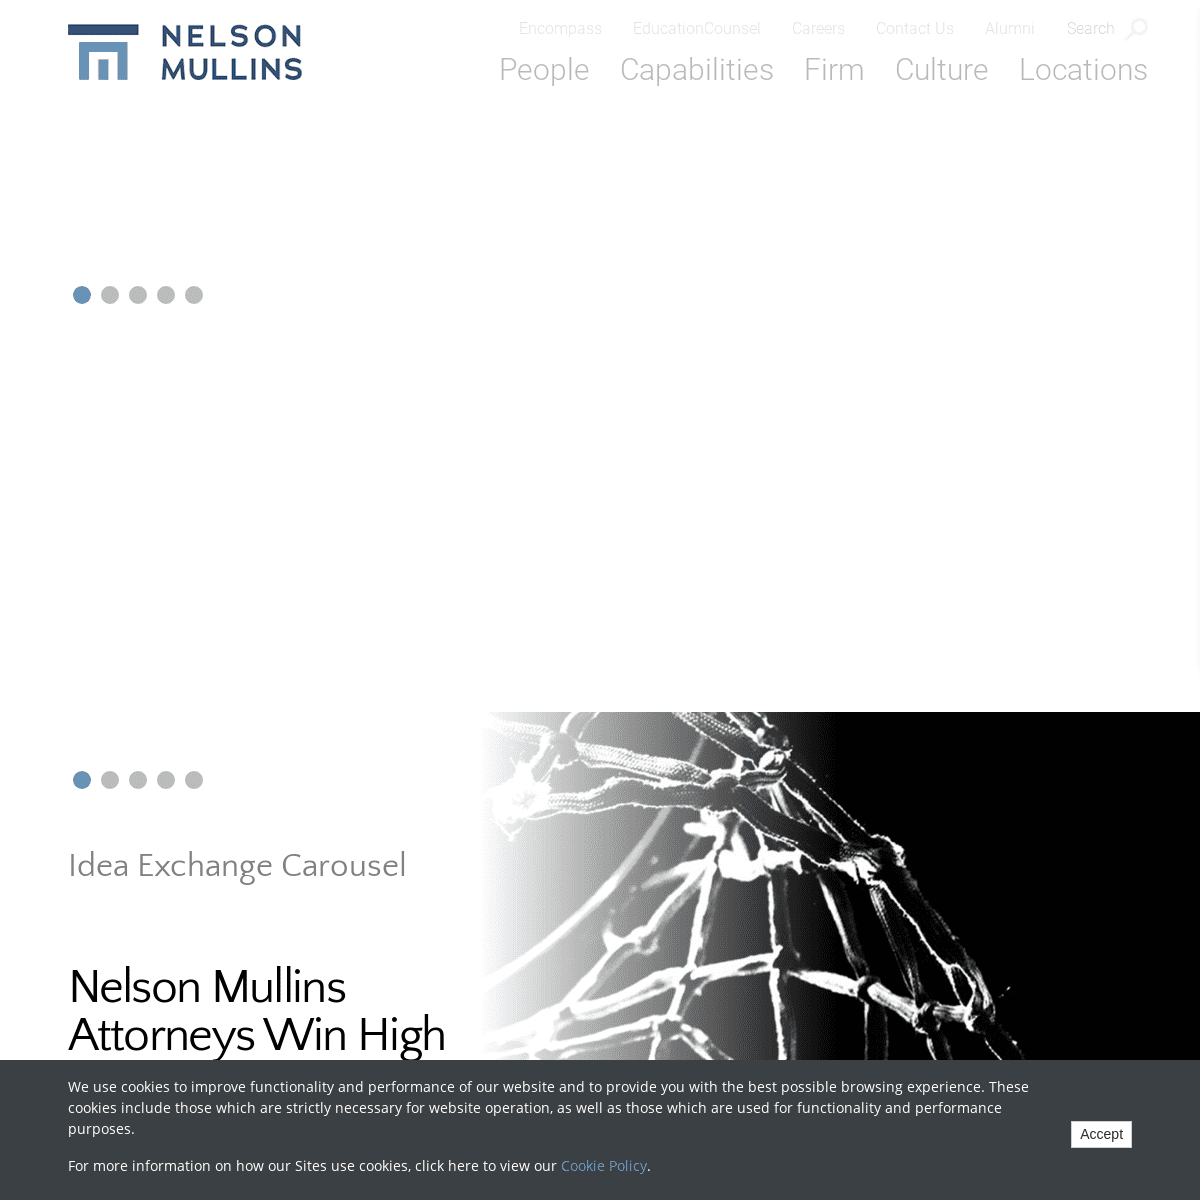 A complete backup of https://nelsonmullins.com